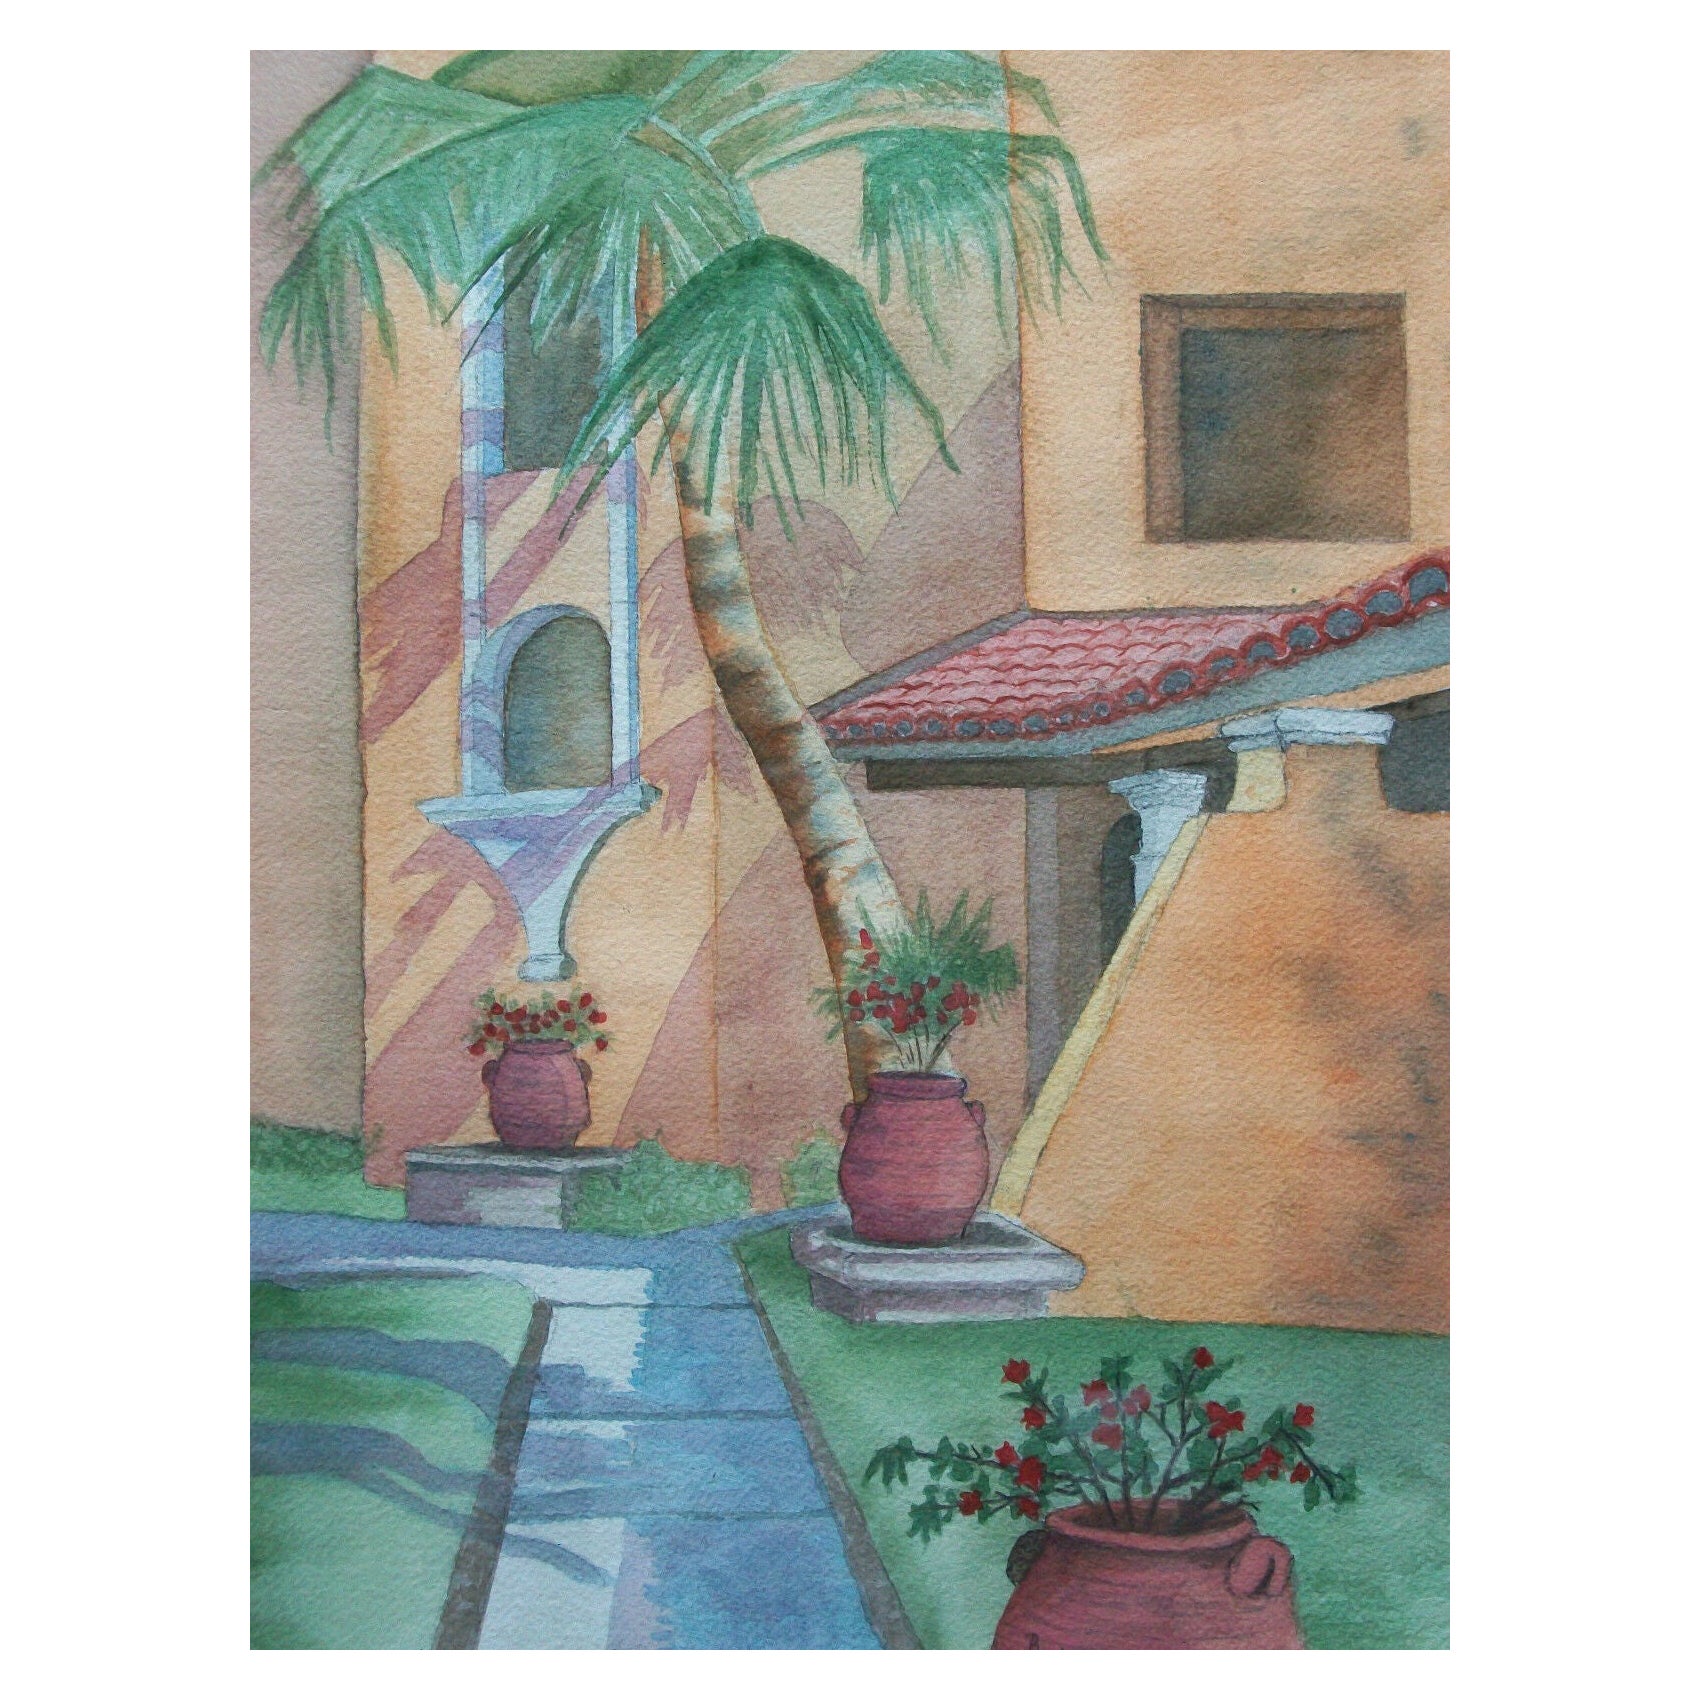 B. McKay, 'La Jolla', Framed Watercolor Painting, Signed & Dated, circa 2000 For Sale